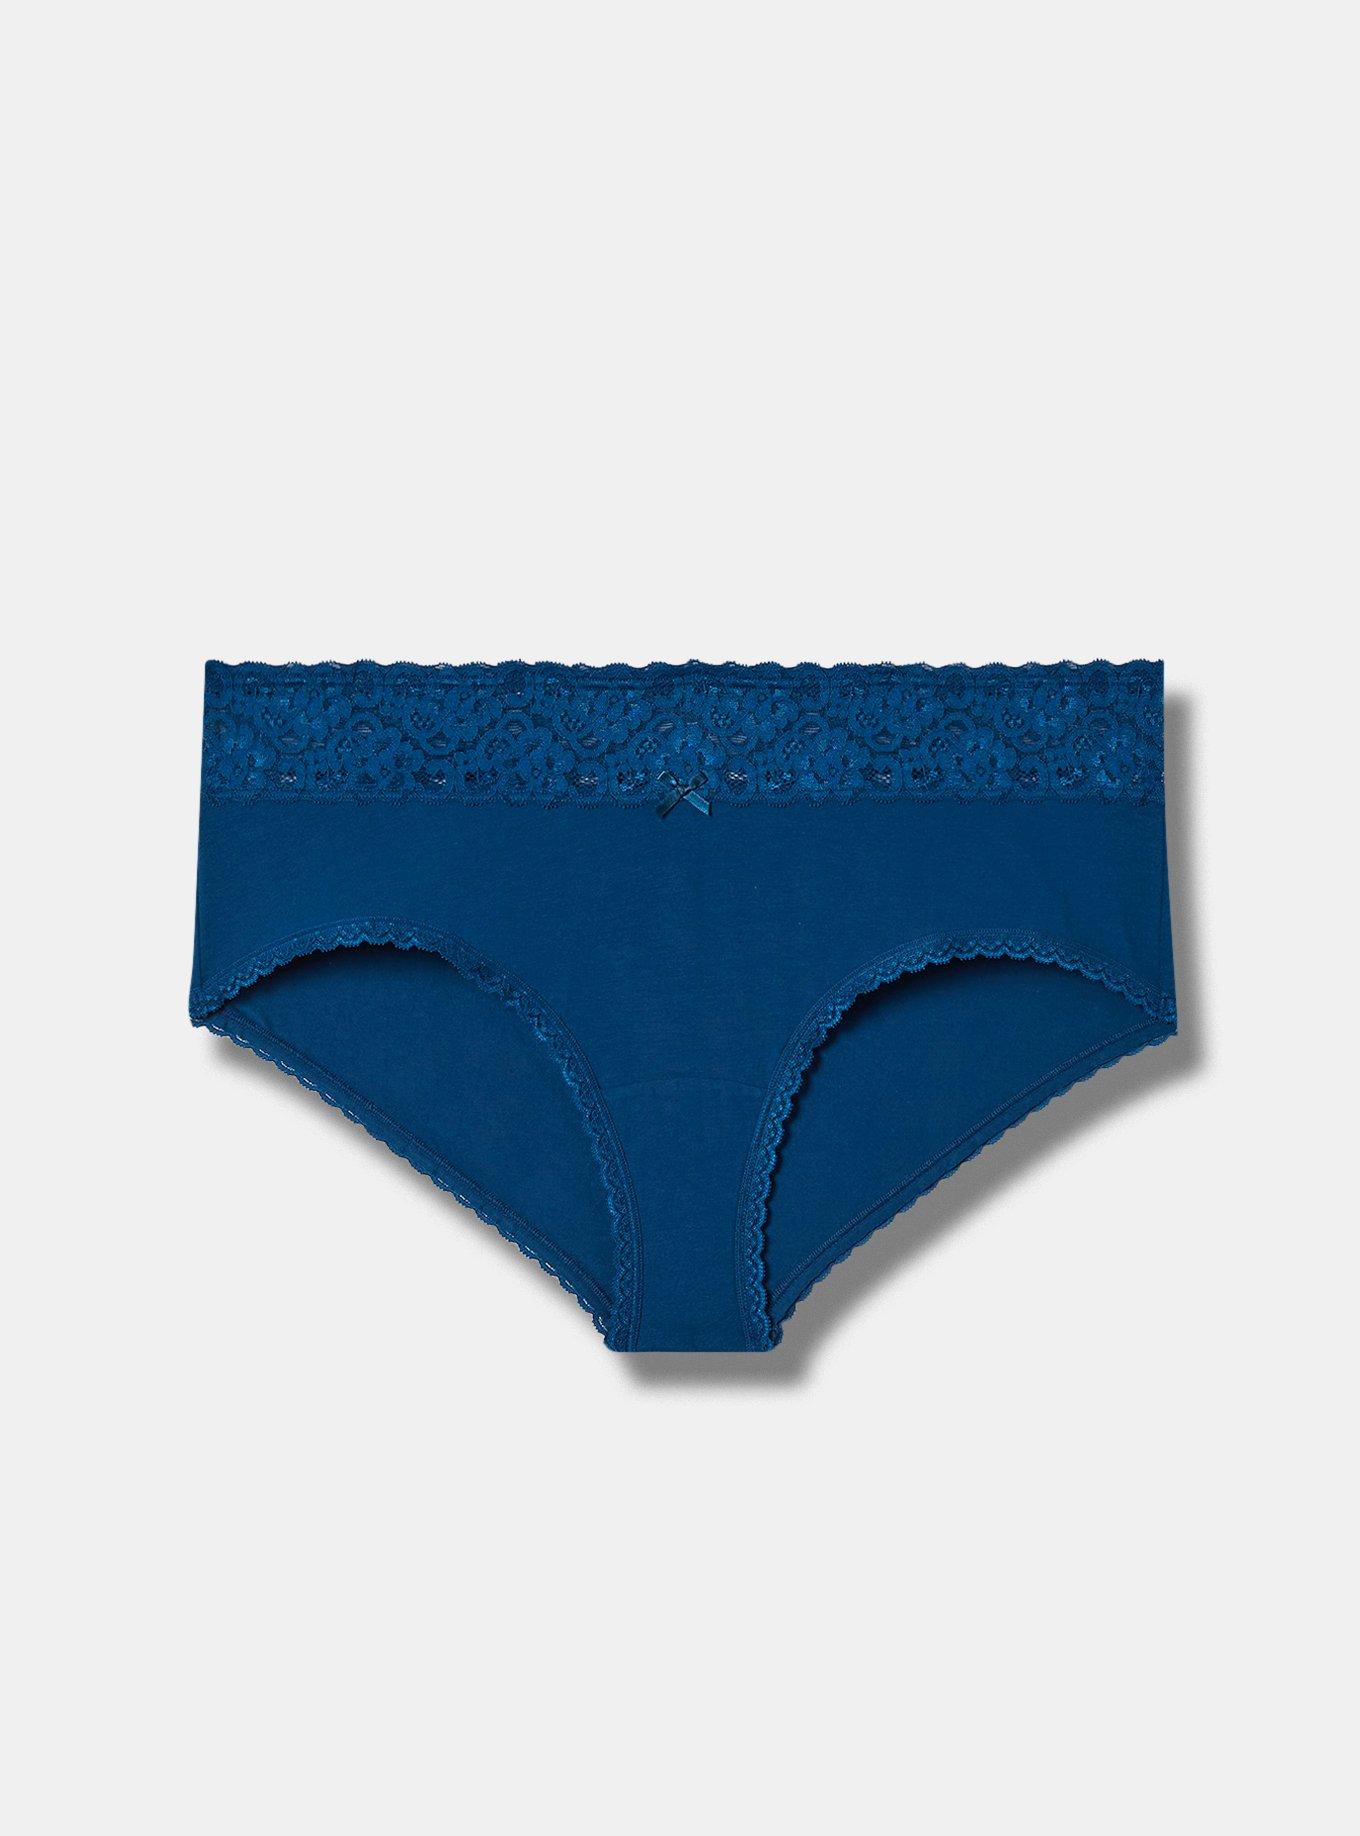 Cotton Essentials Lace-Trim Cheeky Panty in Blue & Multi